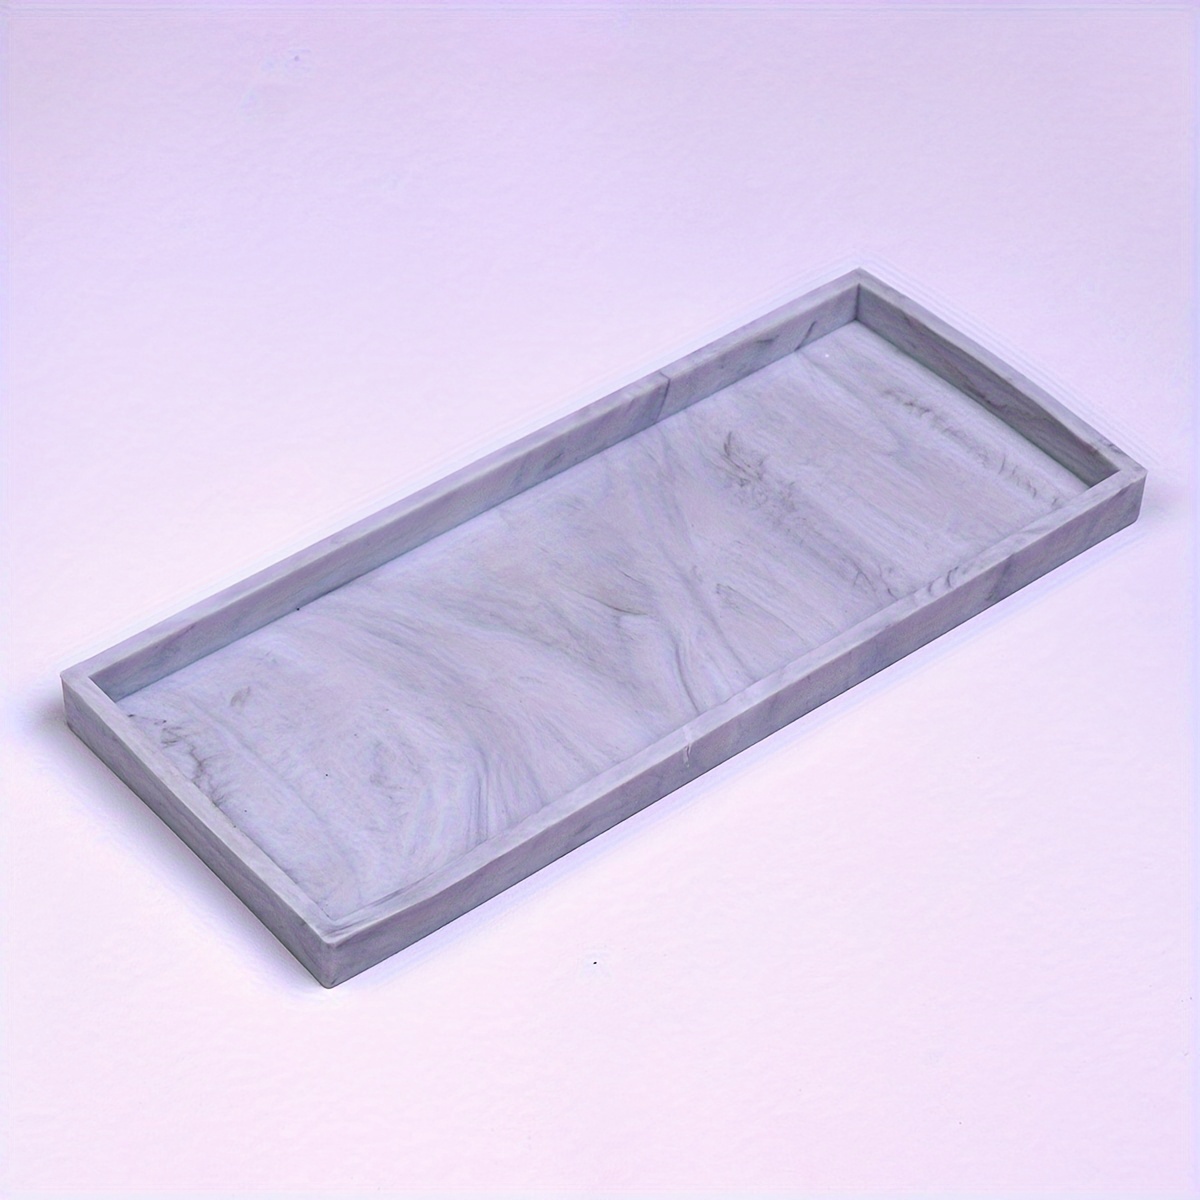 Bathroom Counter Tray Silicone Vanity Tray Shatterproof Flexible Bathroom  Tray Kitchen Sink Tray for Soap Bottles, Key Trinket Ring Tray (Marble